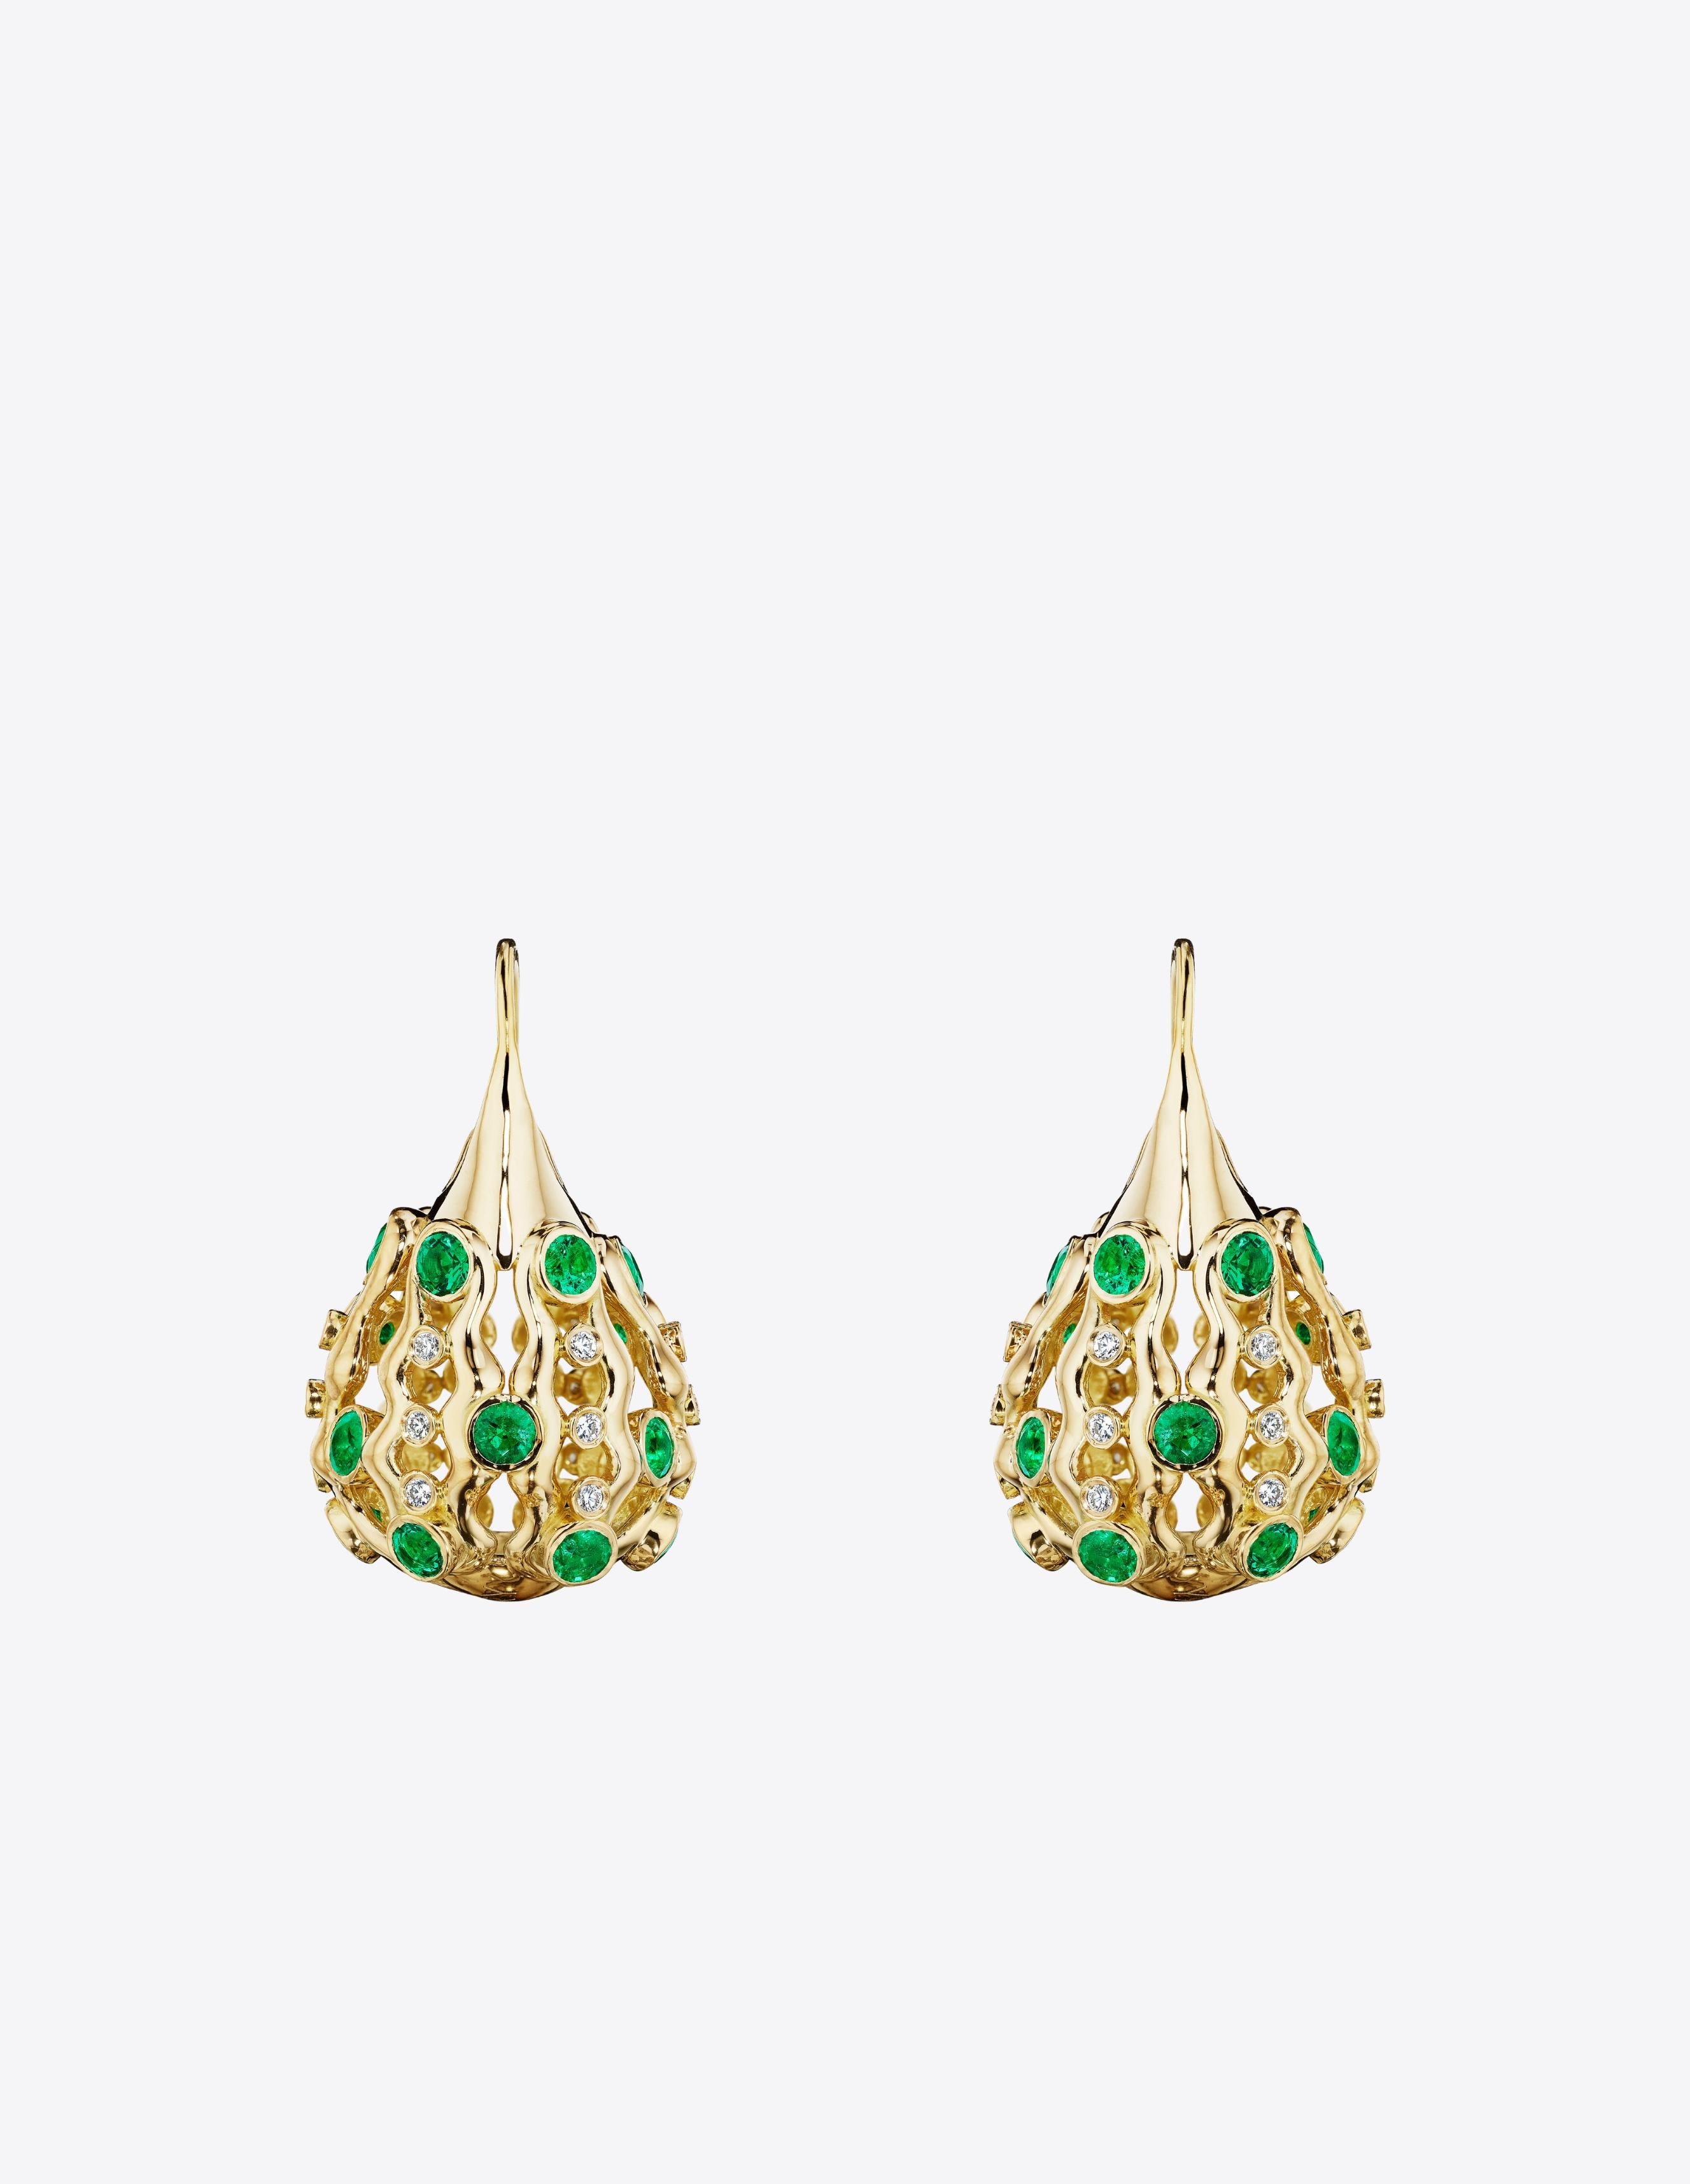 Inspired by ornate woven Gullah baskets woven in the American Southeast, generational craftsmanship, precious tradition. Drop earrings rendered in 18k gold and set with faceted emeralds and diamonds. 1.25 drop on hook fastening for pierced ears.